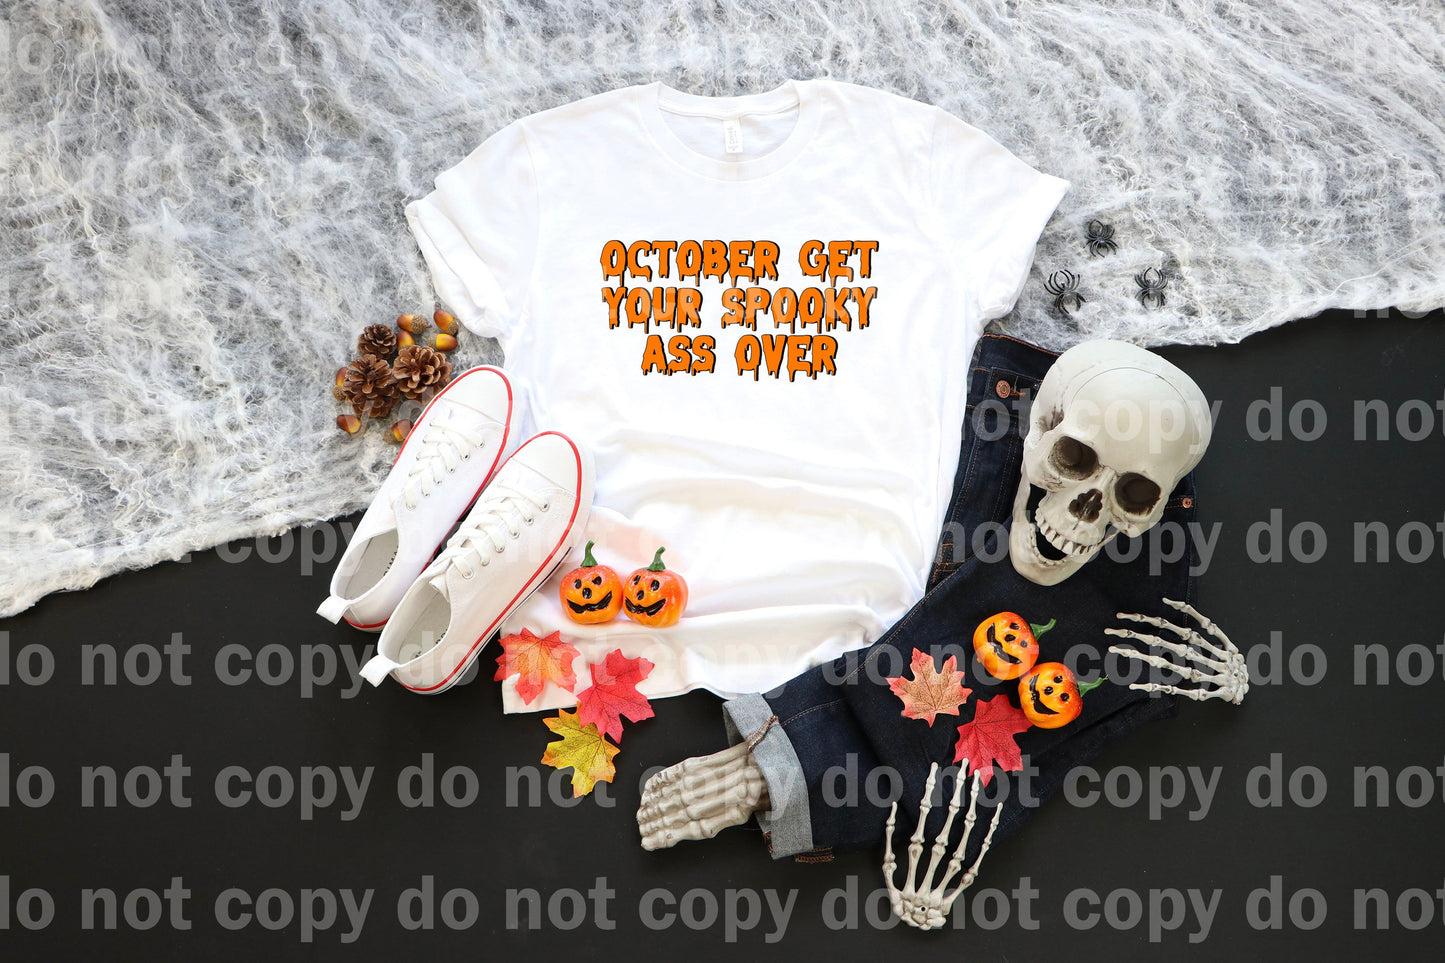 October Get Your Spooky Ass Over Dream Print or Sublimation Print